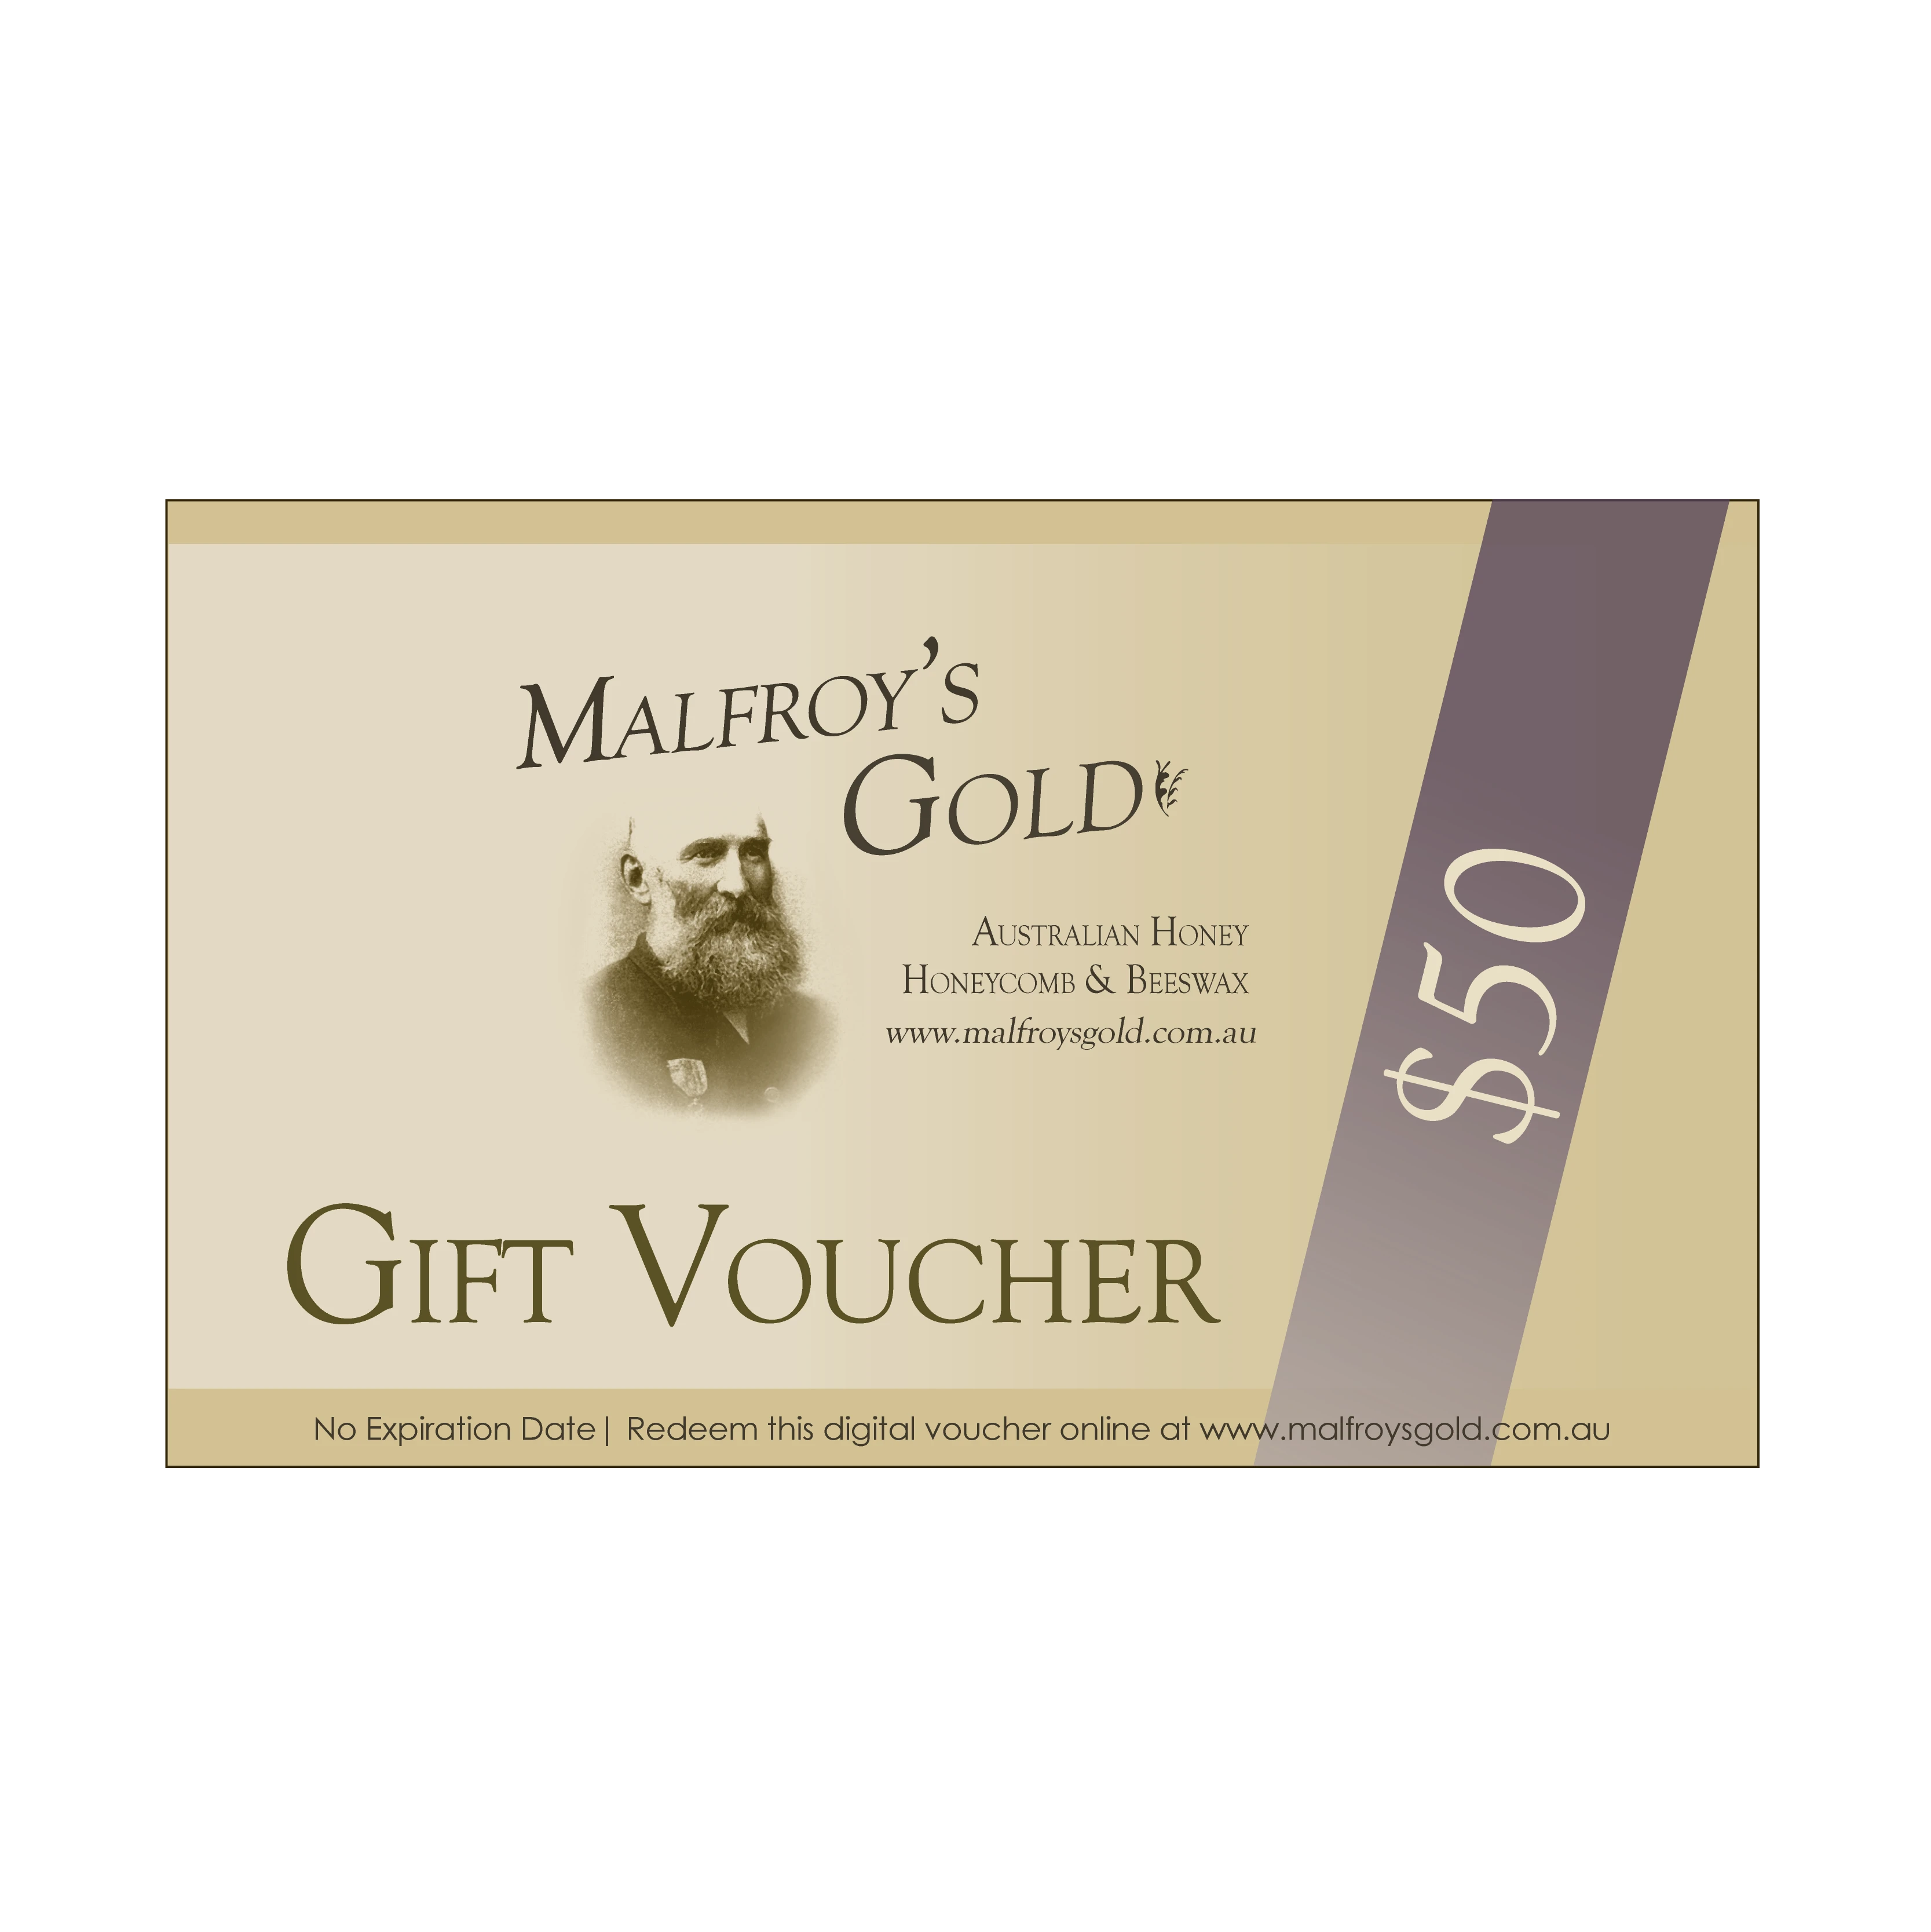 Malfroy's Gold $50 Gift Voucher